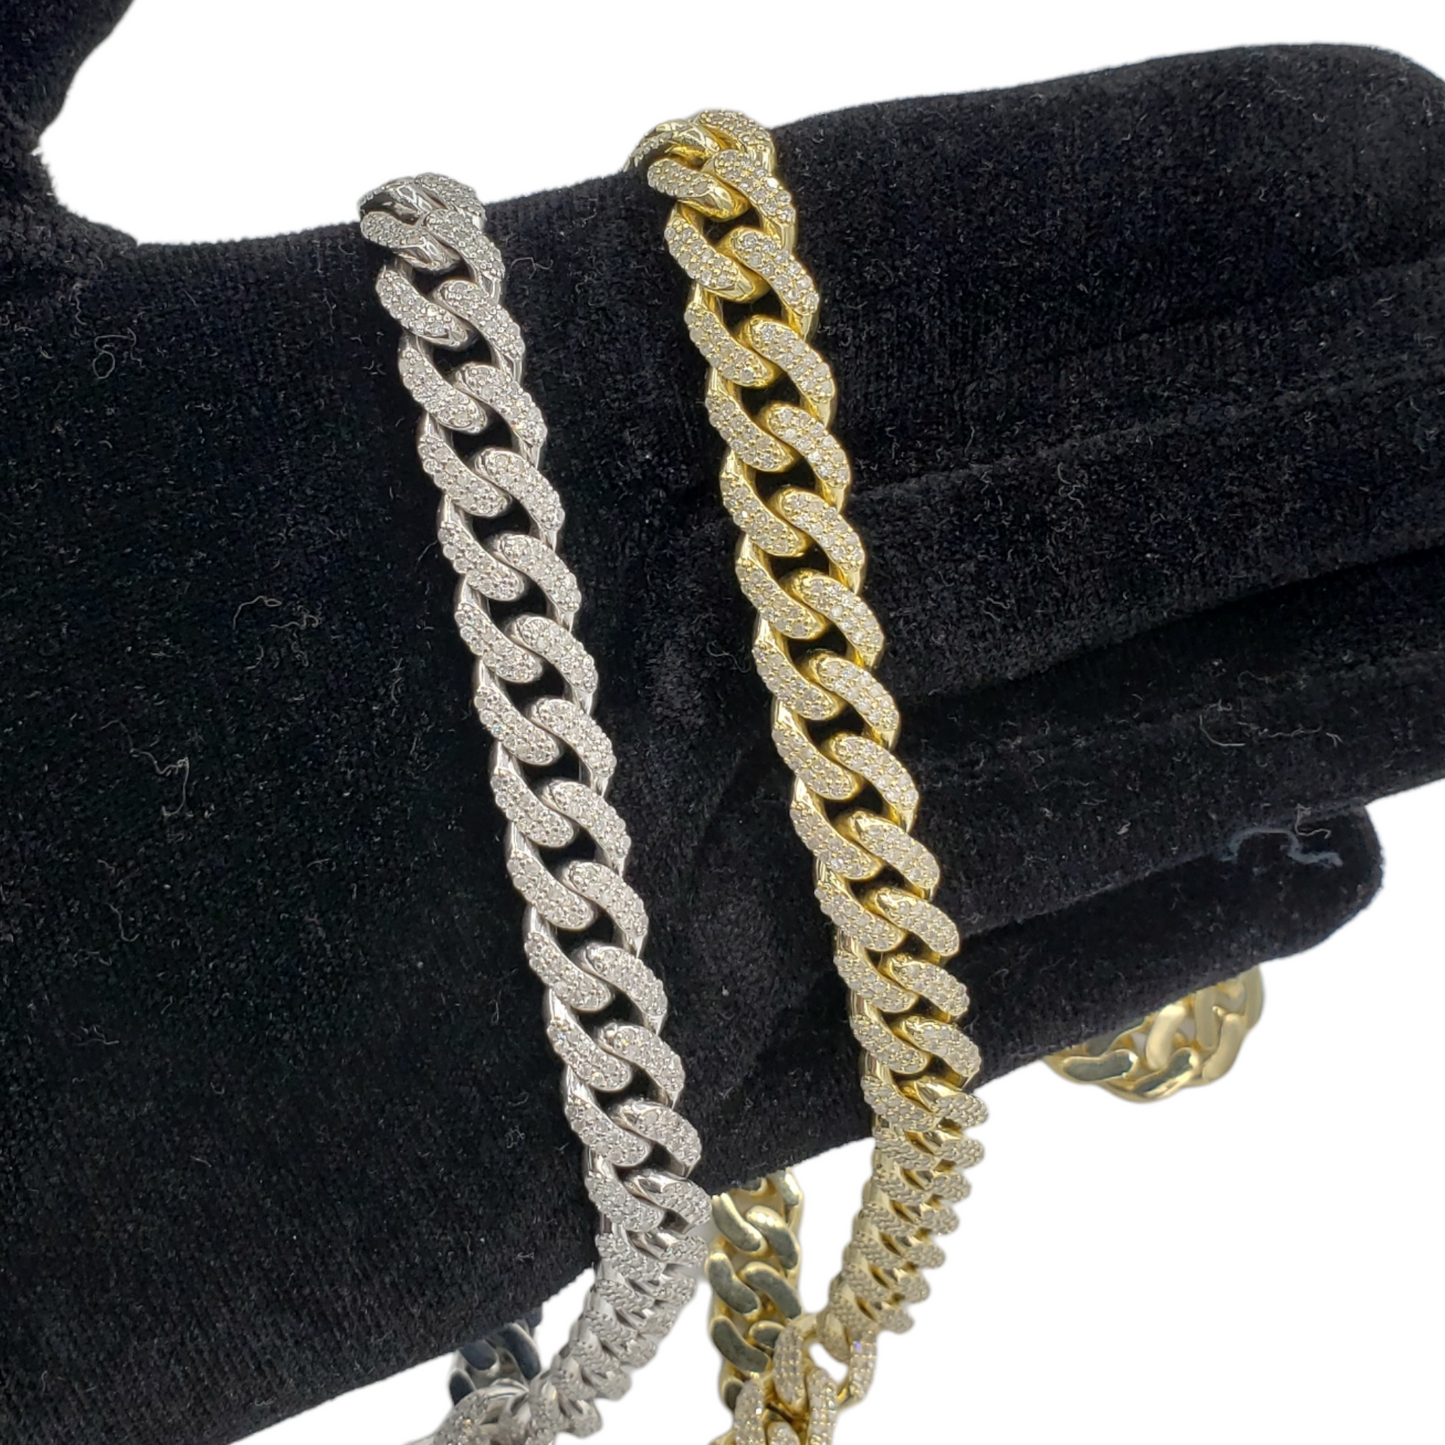 10K Gold- Iced Out Diamond Miami Cuban Chains (10mm)